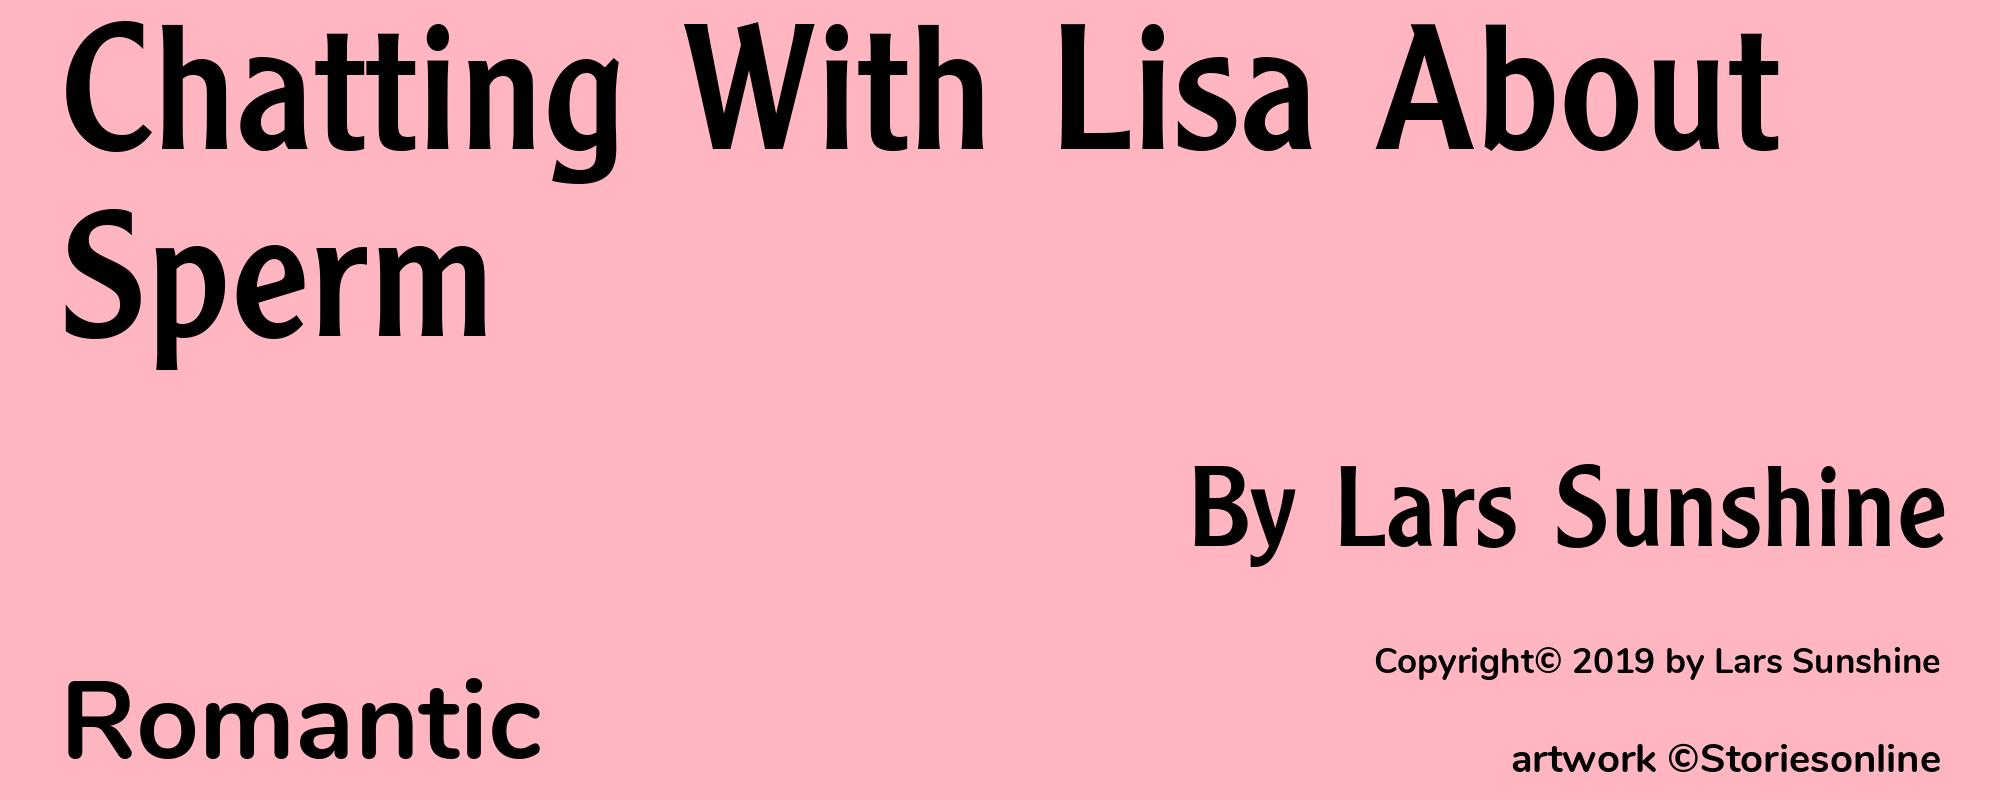 Chatting With Lisa About Sperm - Cover